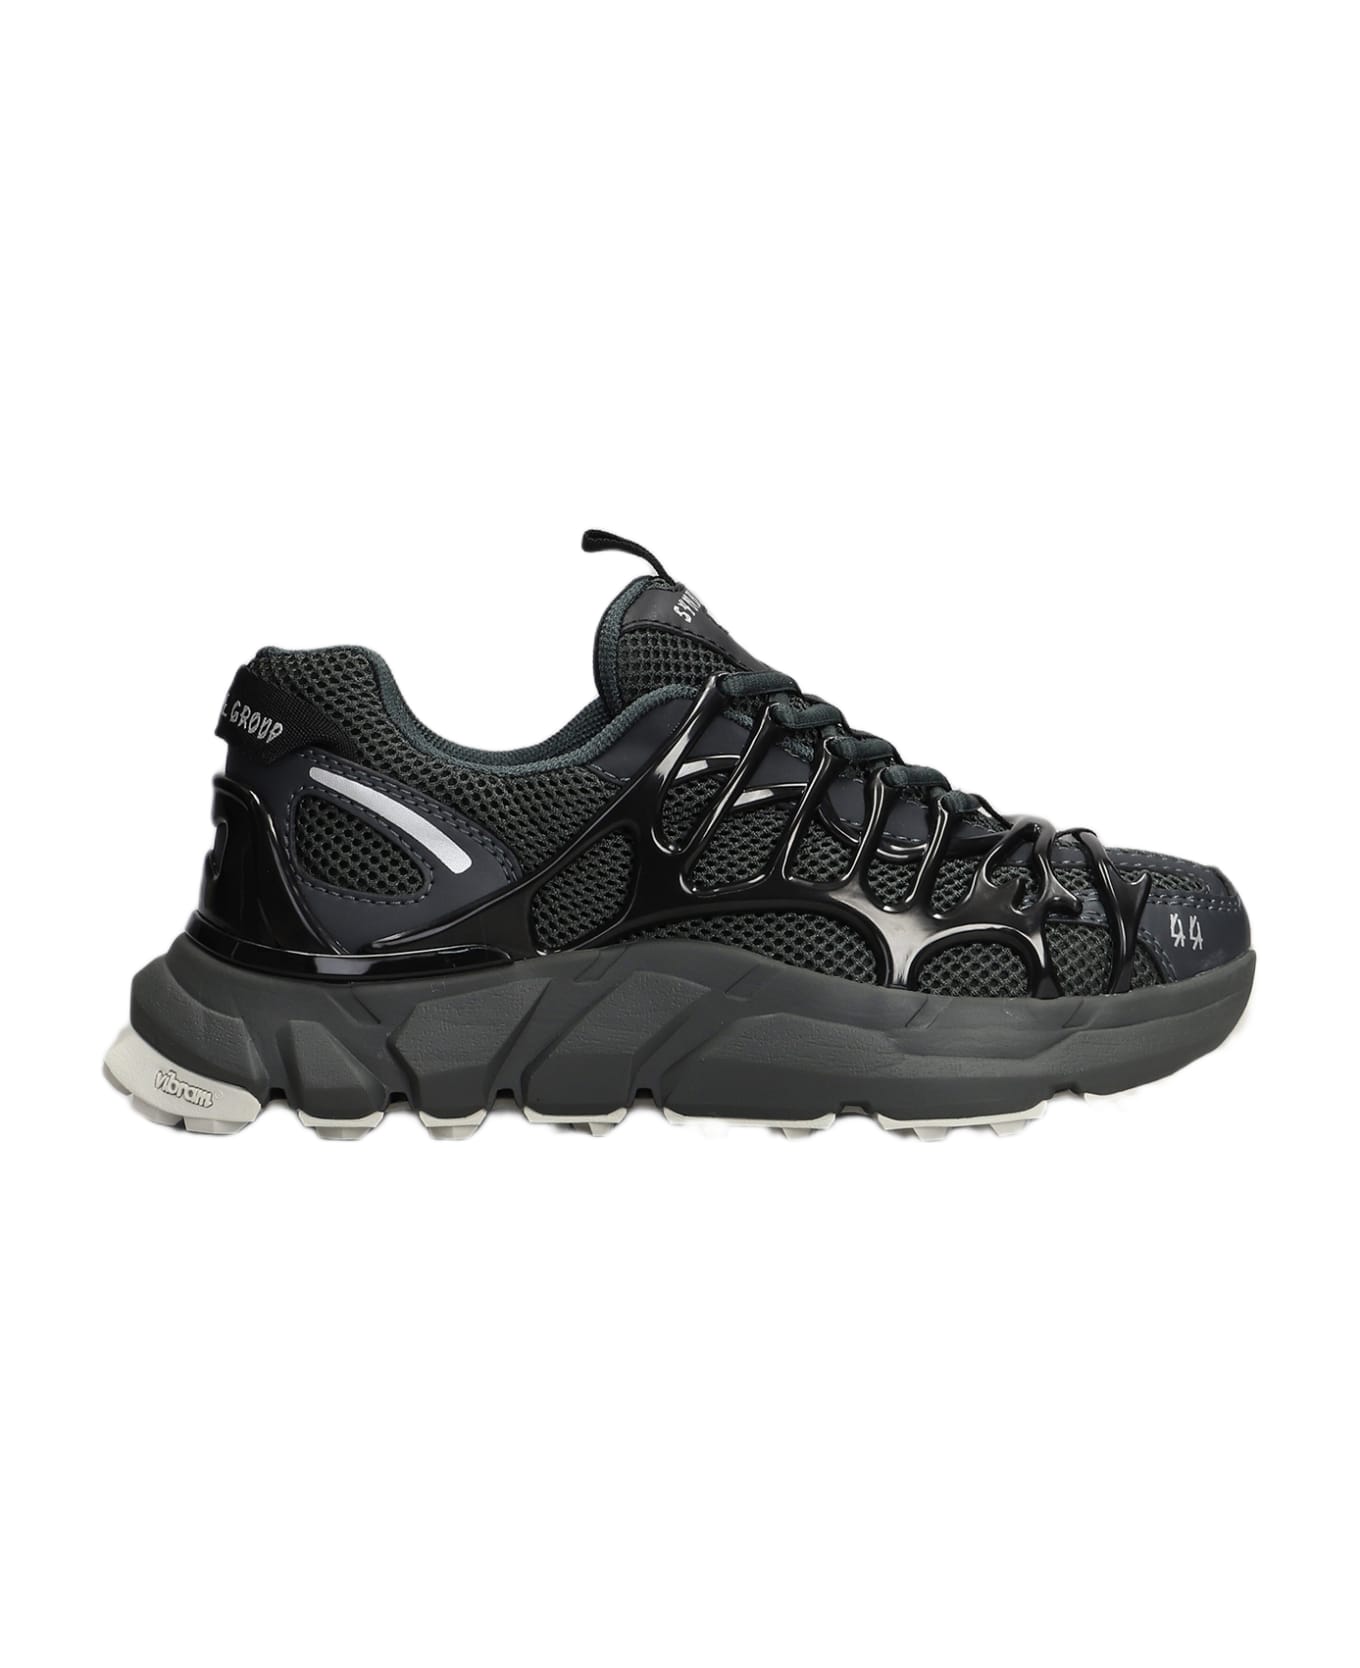 44 Label Group Symbiont 2 Sneakers In Black Polyester - black スニーカー